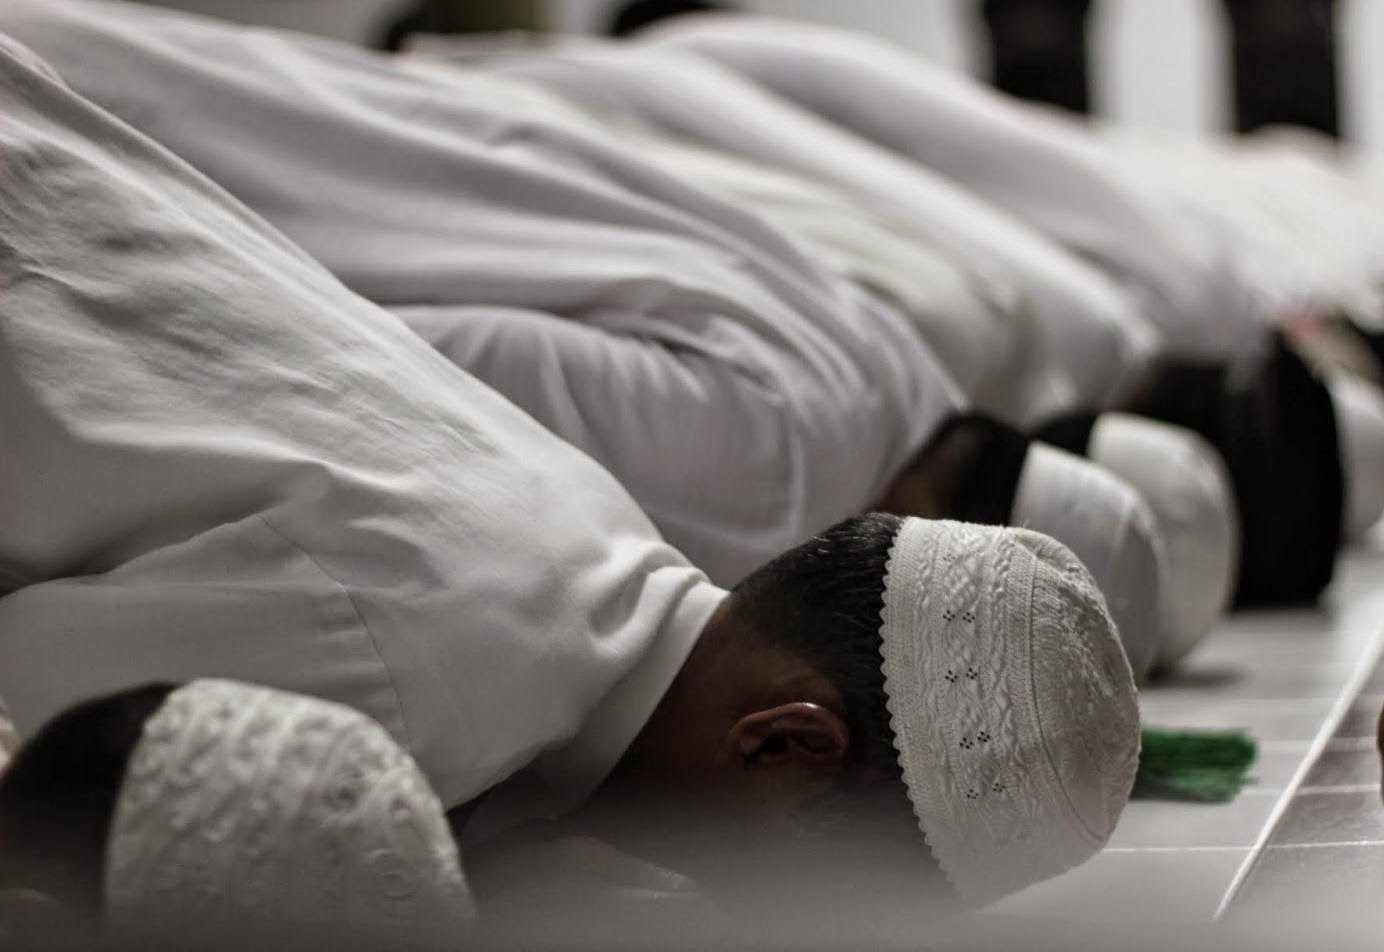 Excellence of Prostration (Sujud)